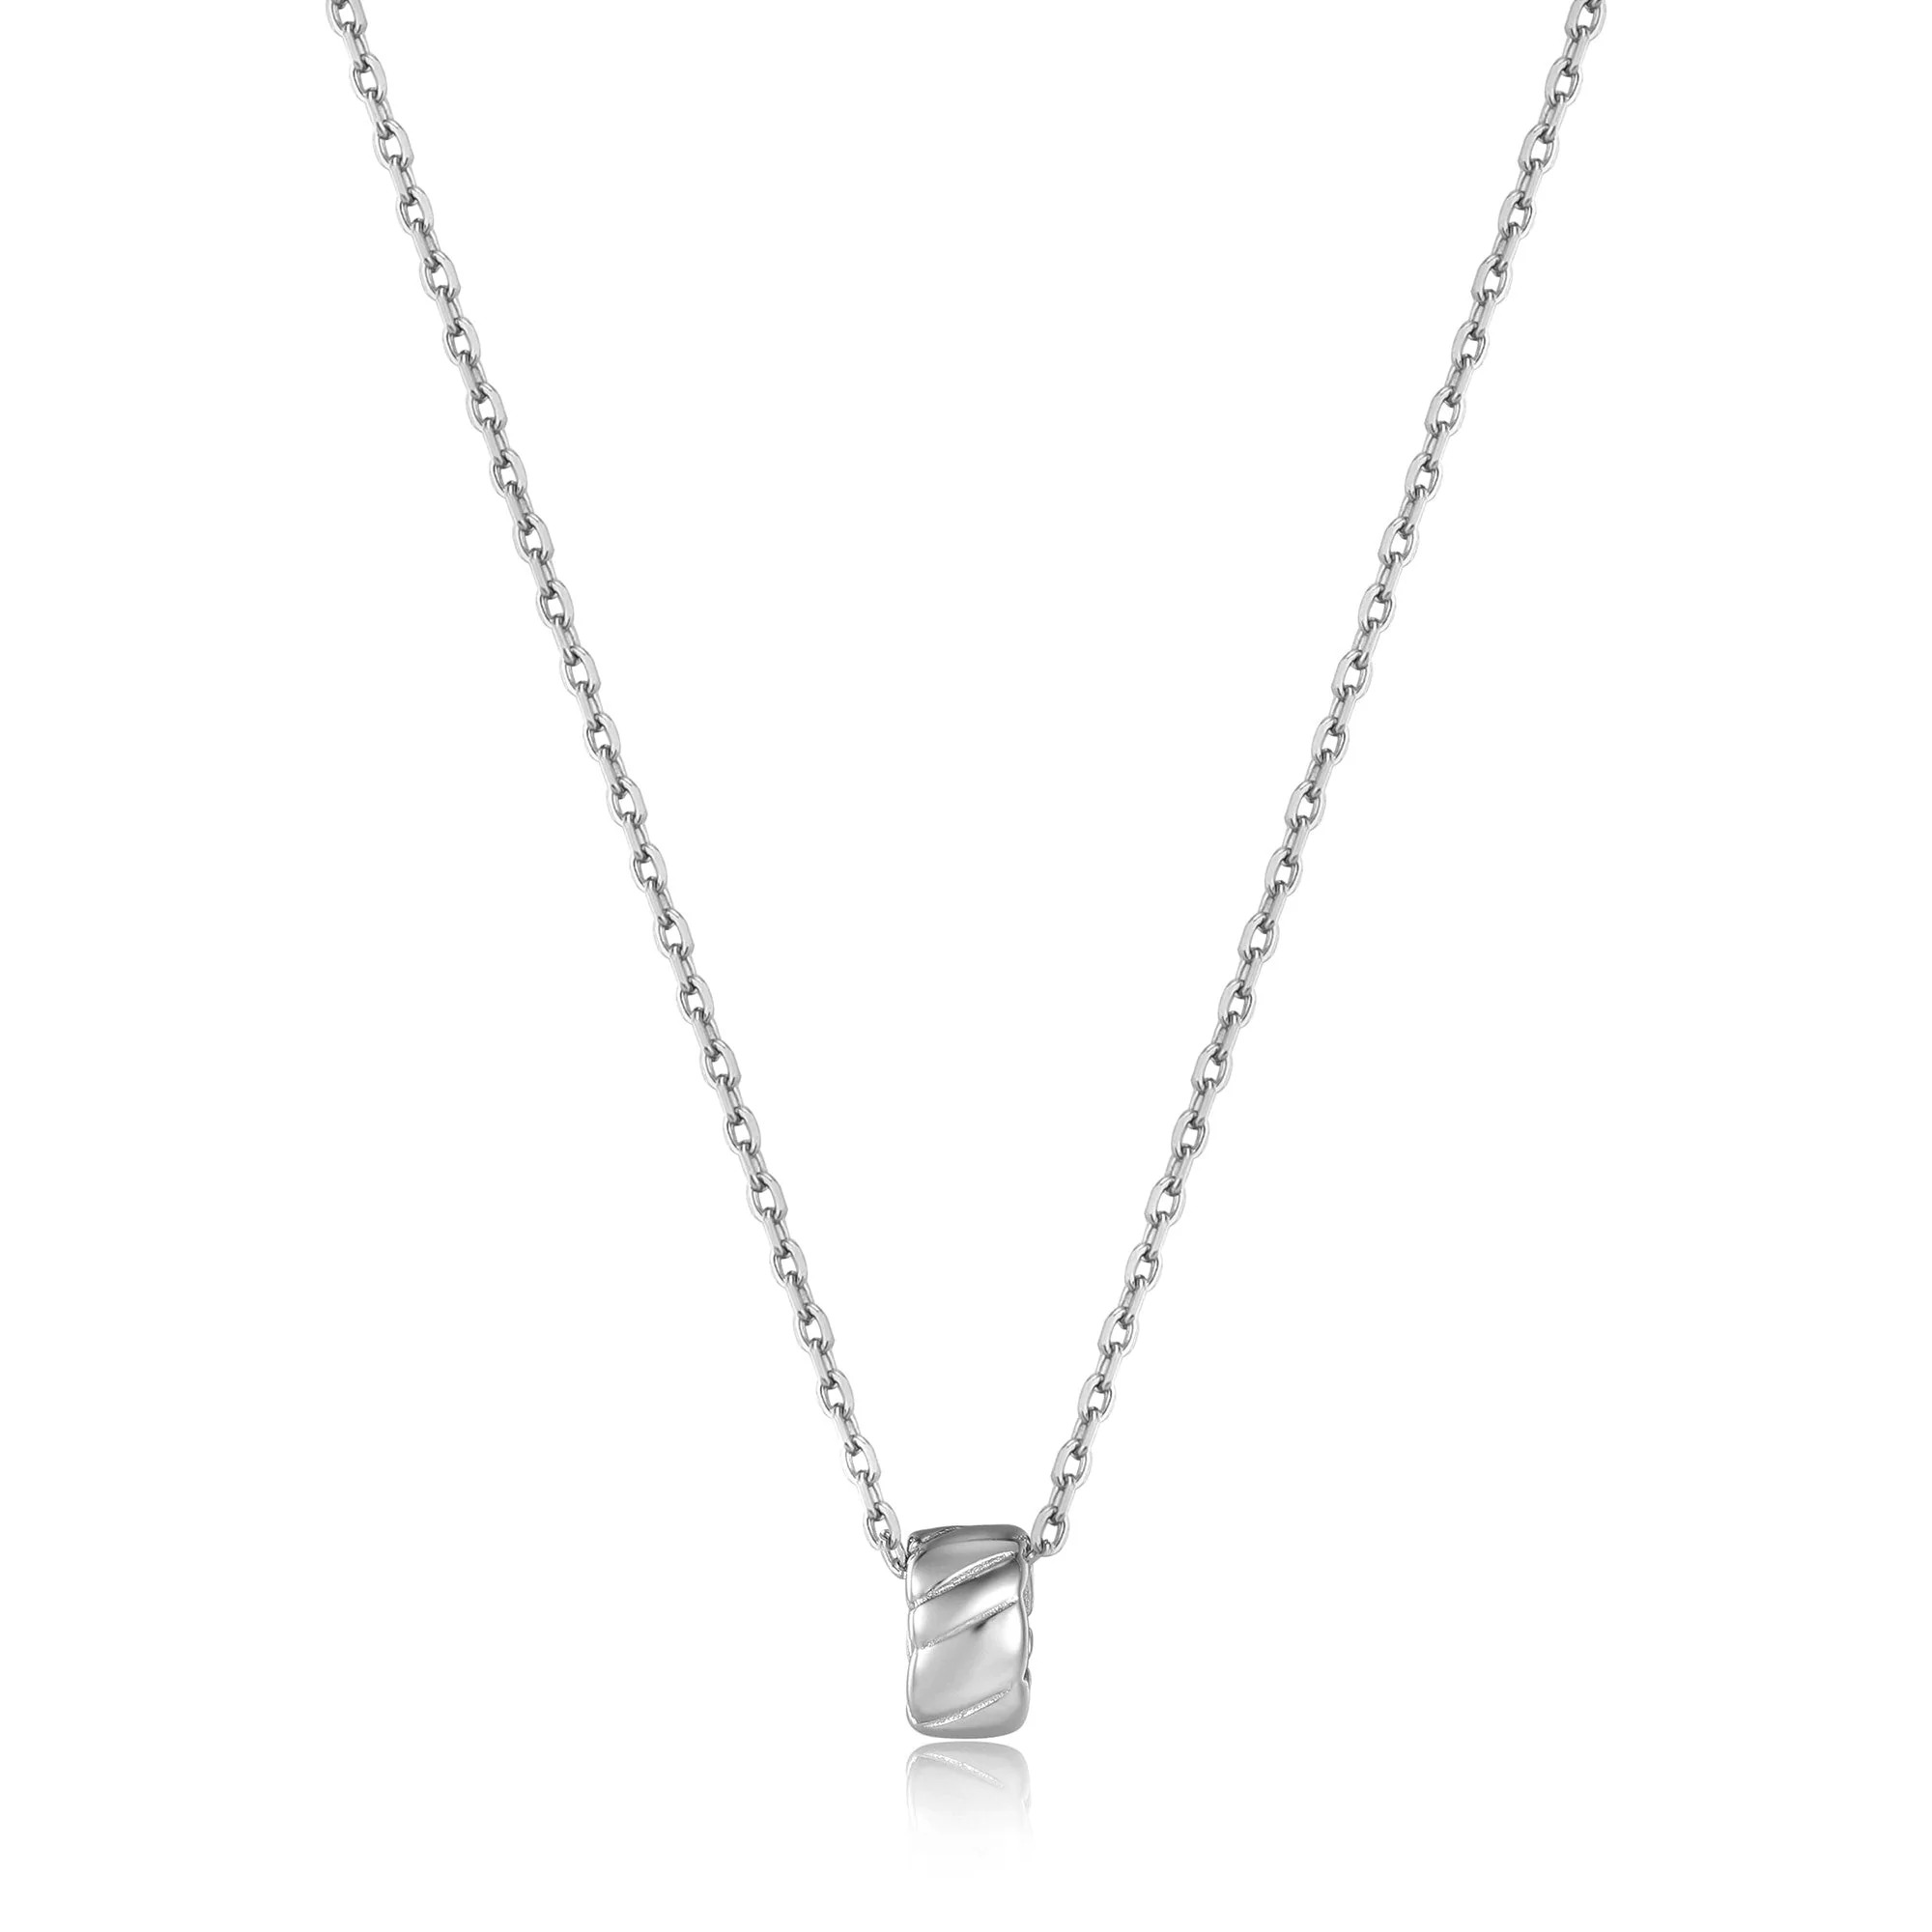 ANIA HAIE Silver Smooth Twist Pendant Necklace